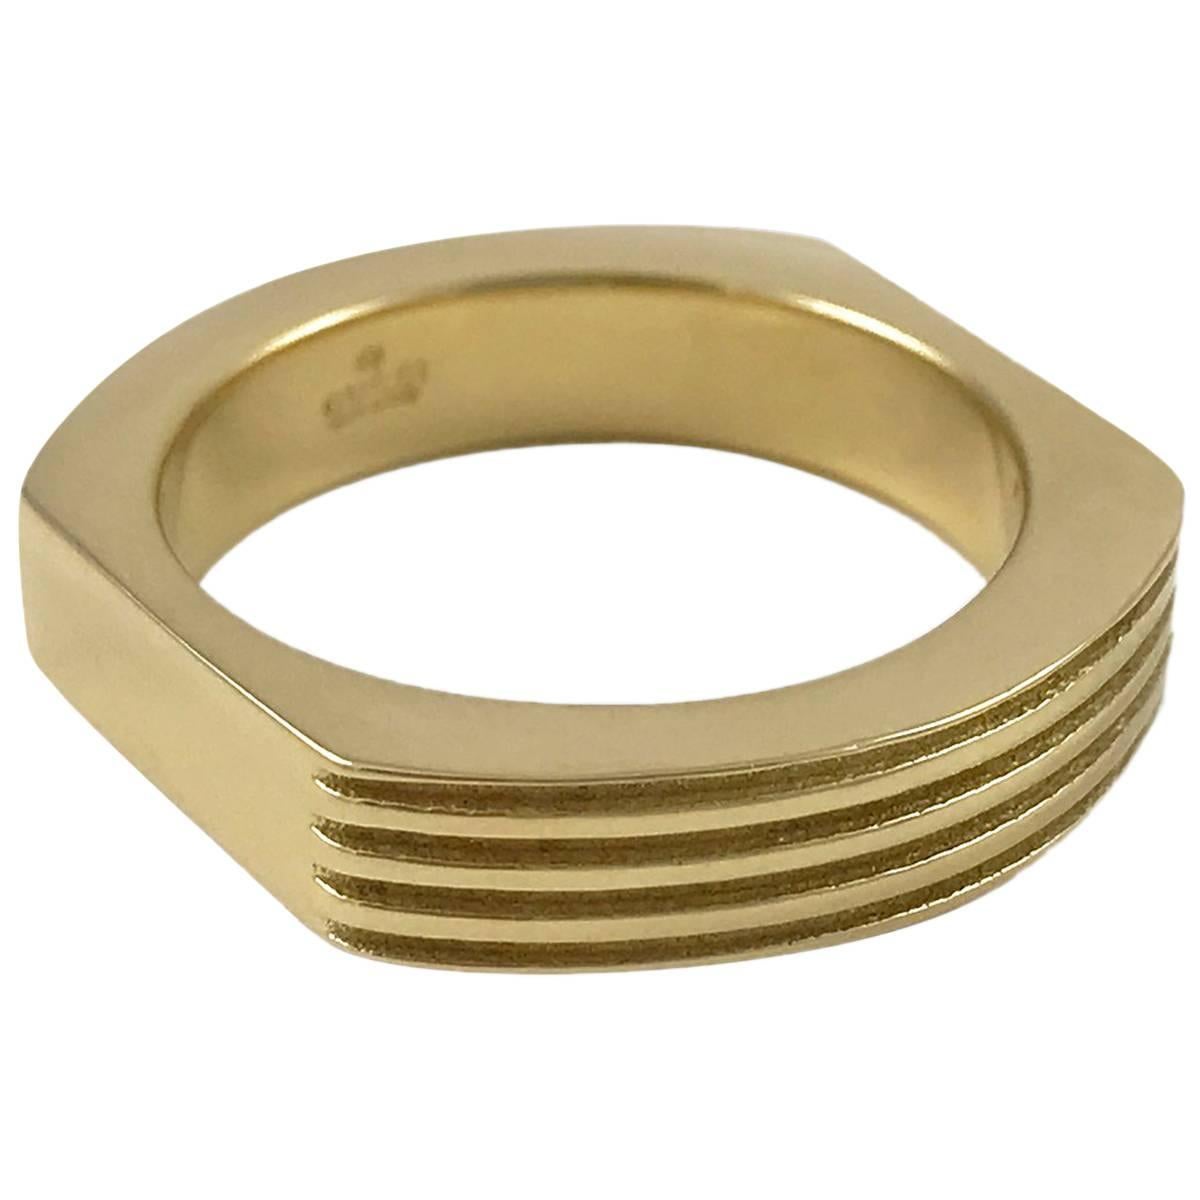 Gentleman’s Gucci Vintage Gold Grooved Ring with Euro Shank